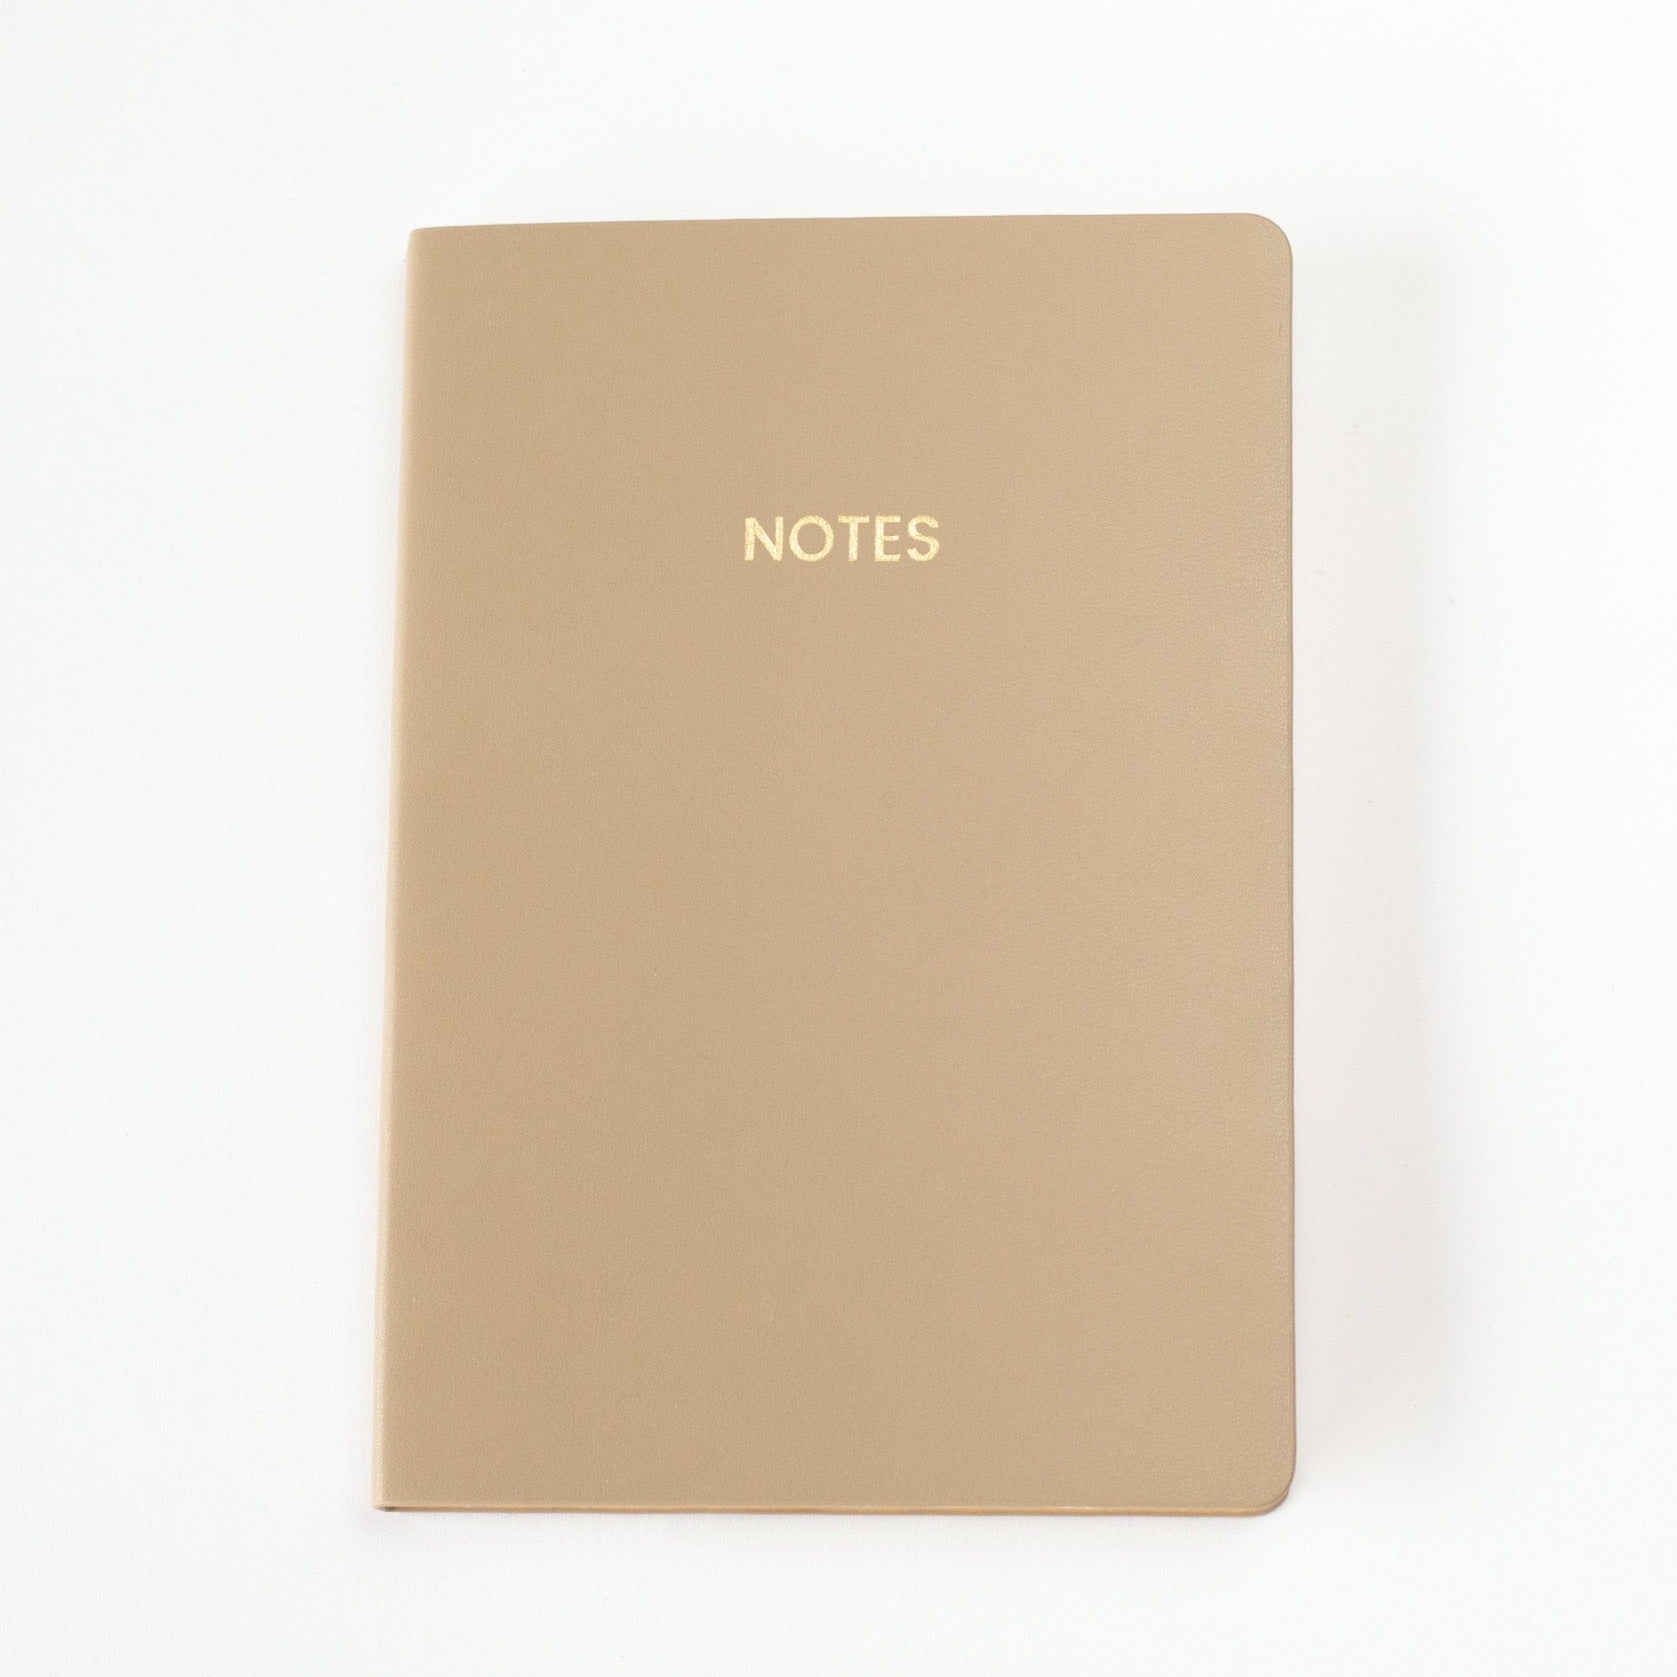 A light brown colored vegan leather notebook with gold foil text reading "NOTES" across the front photographed against a white background.